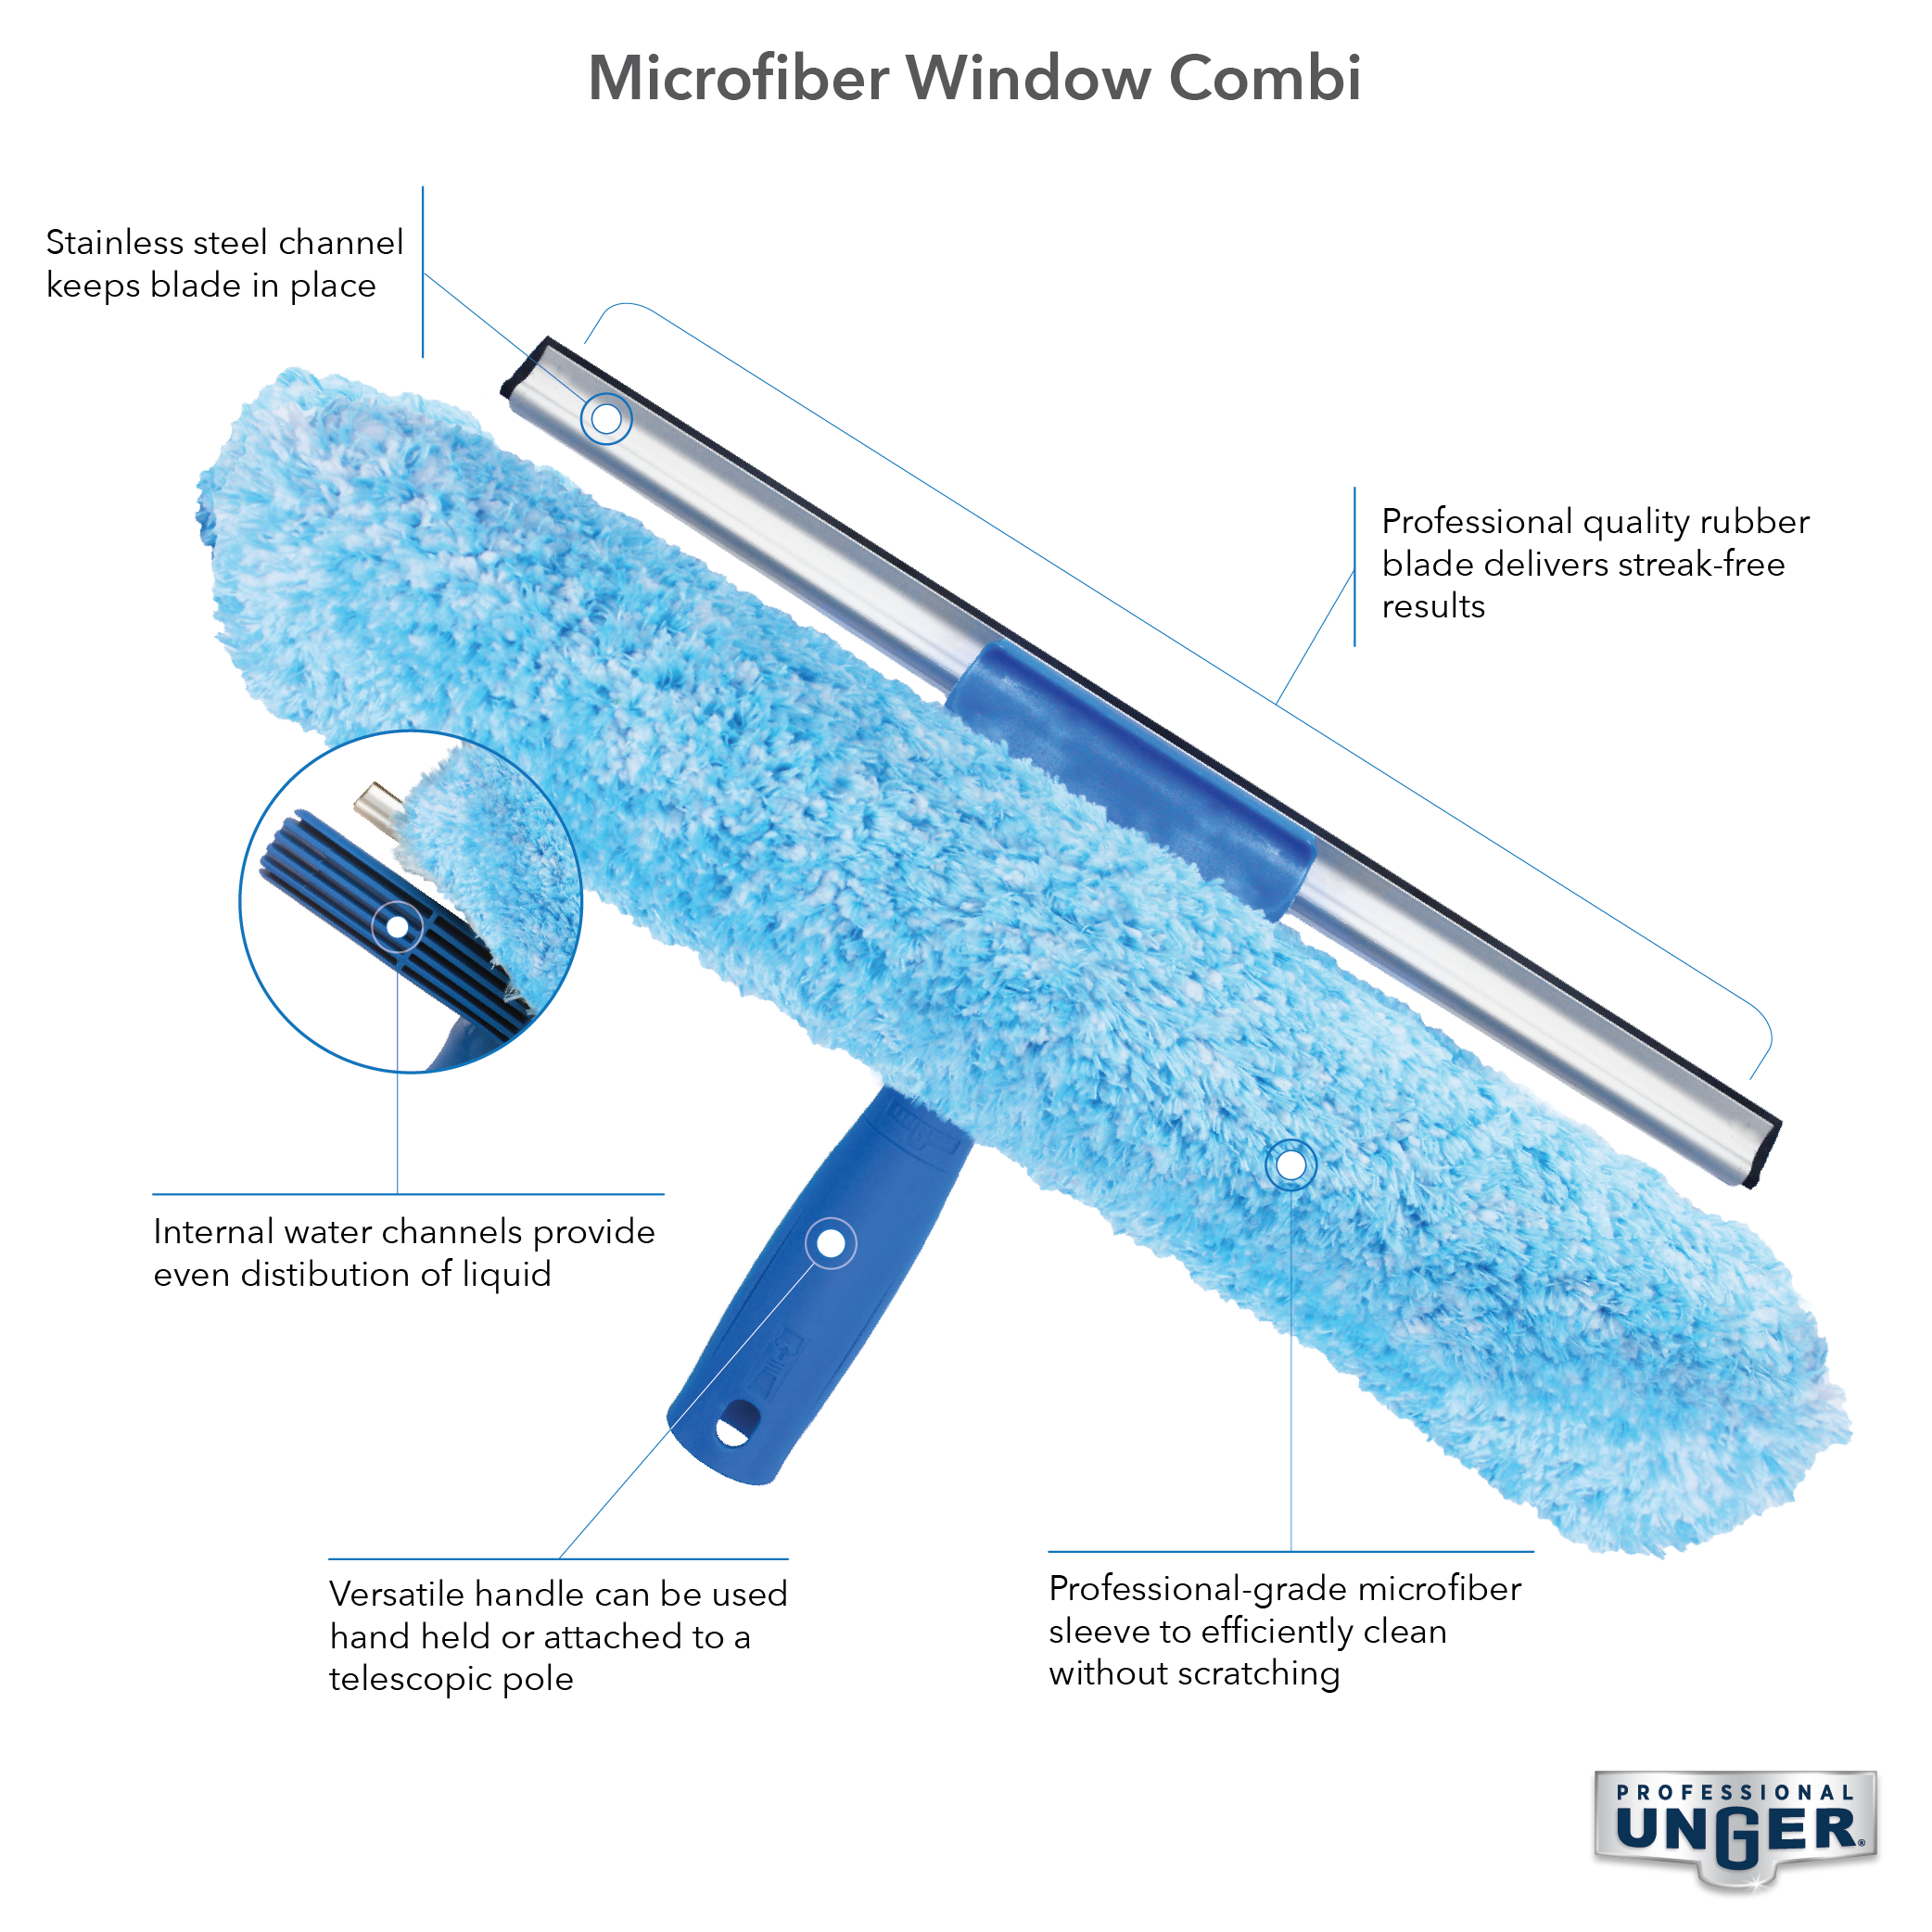 Microfiber window combi by Unger - Unger window cleaning